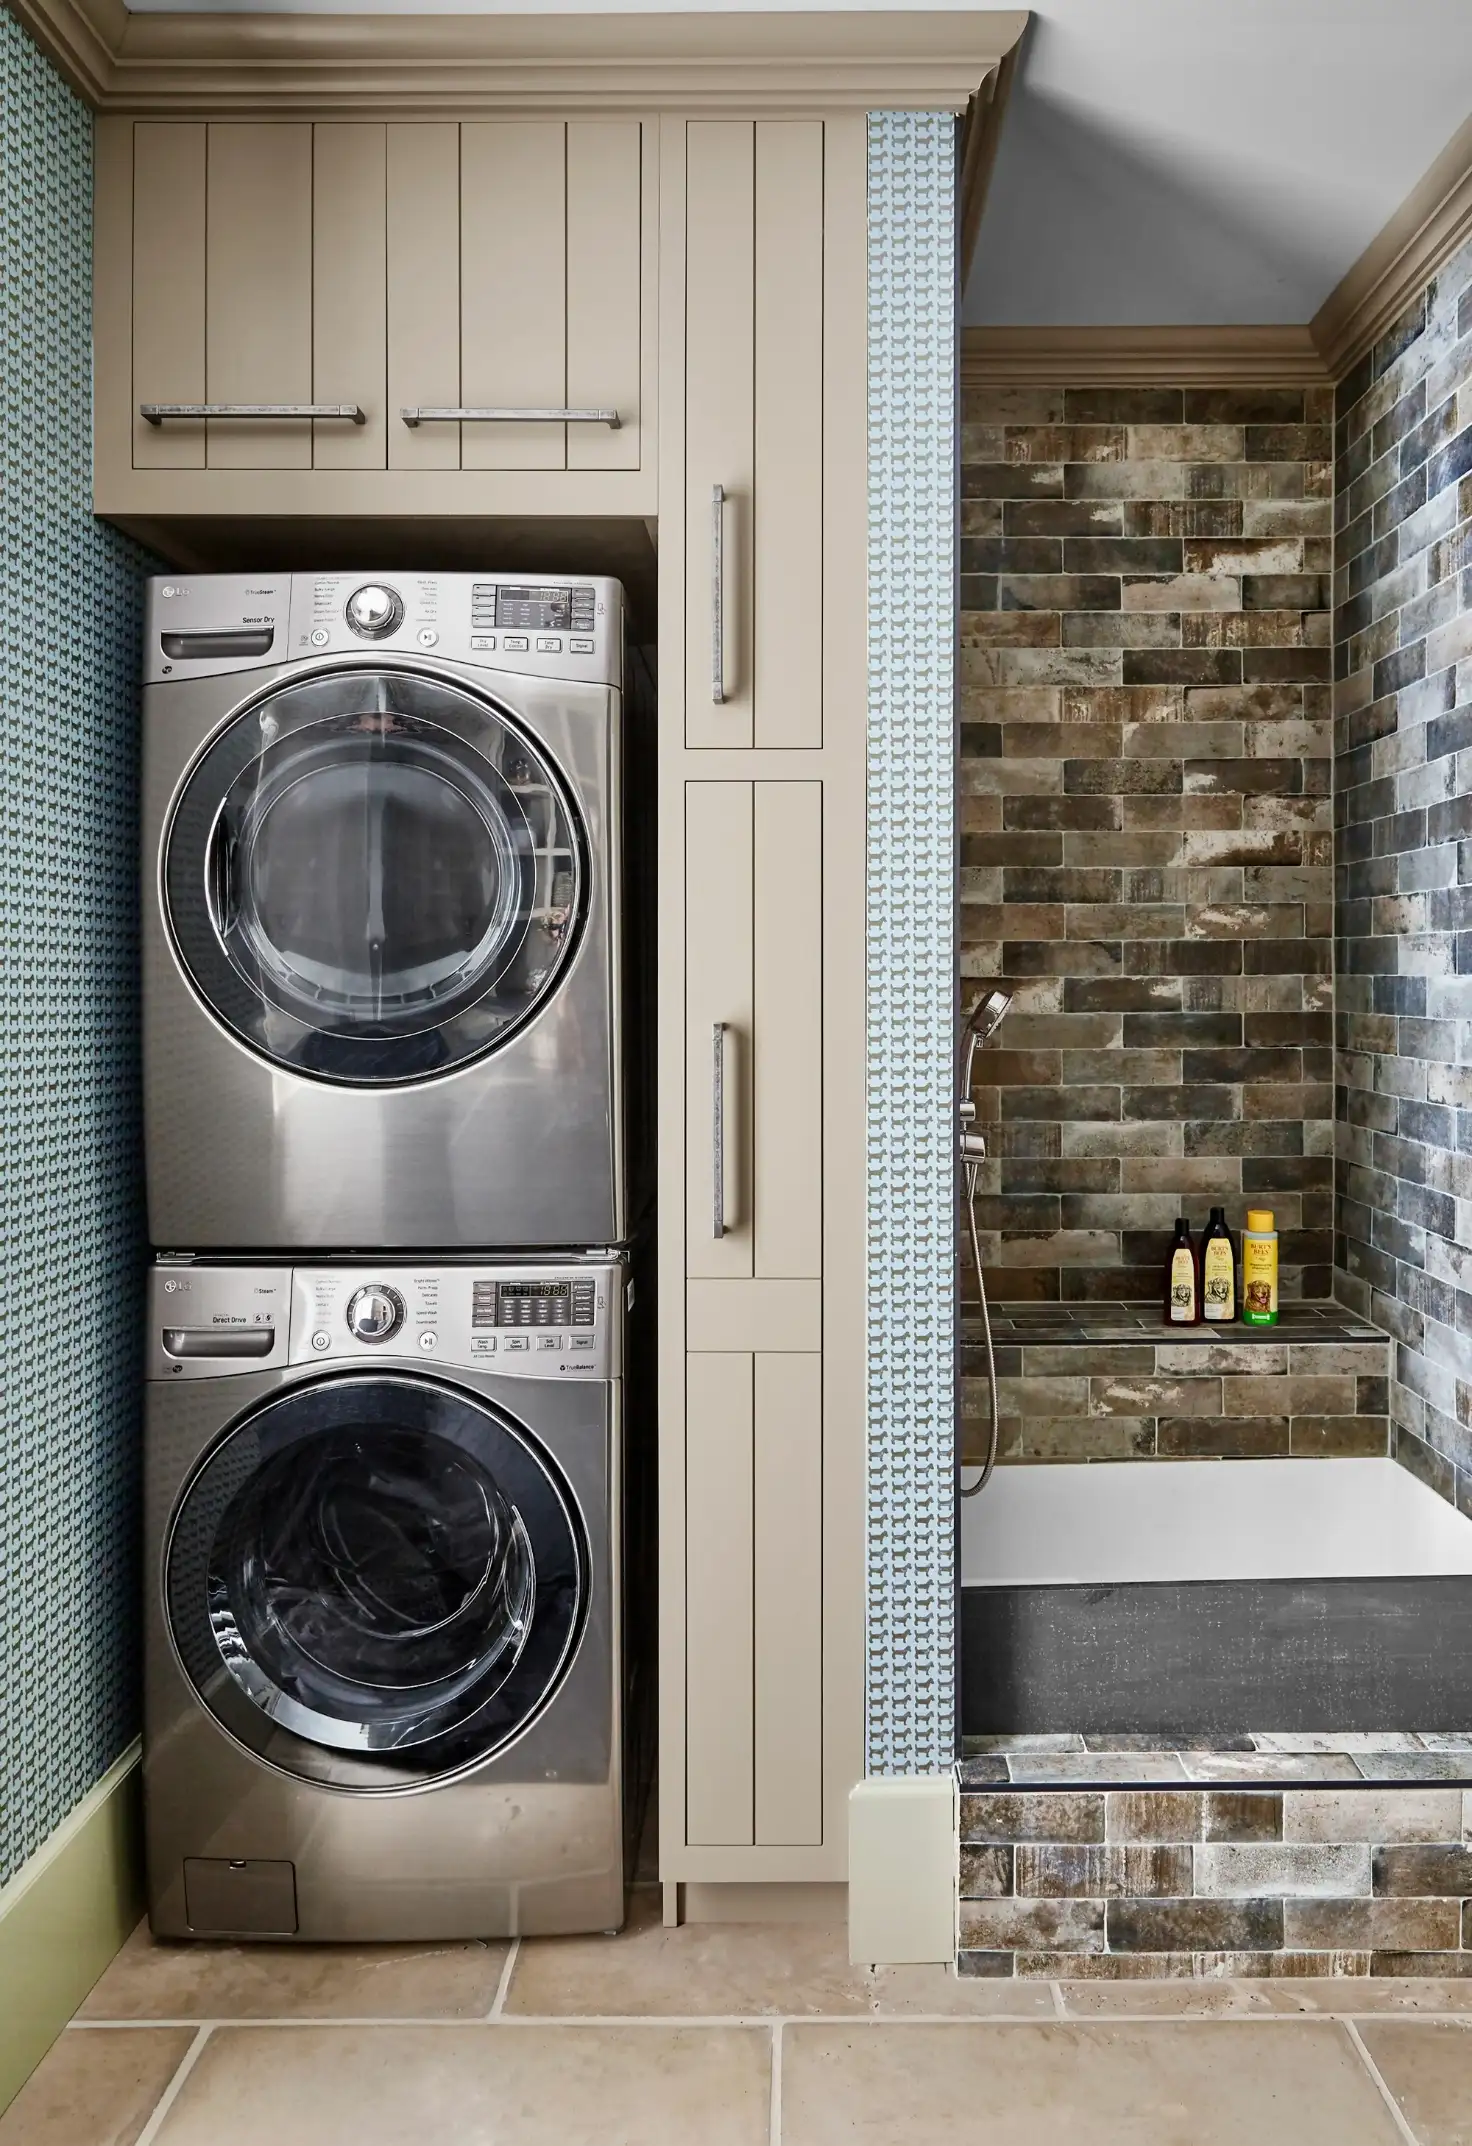 Considering A Placement For Your Laundry Room